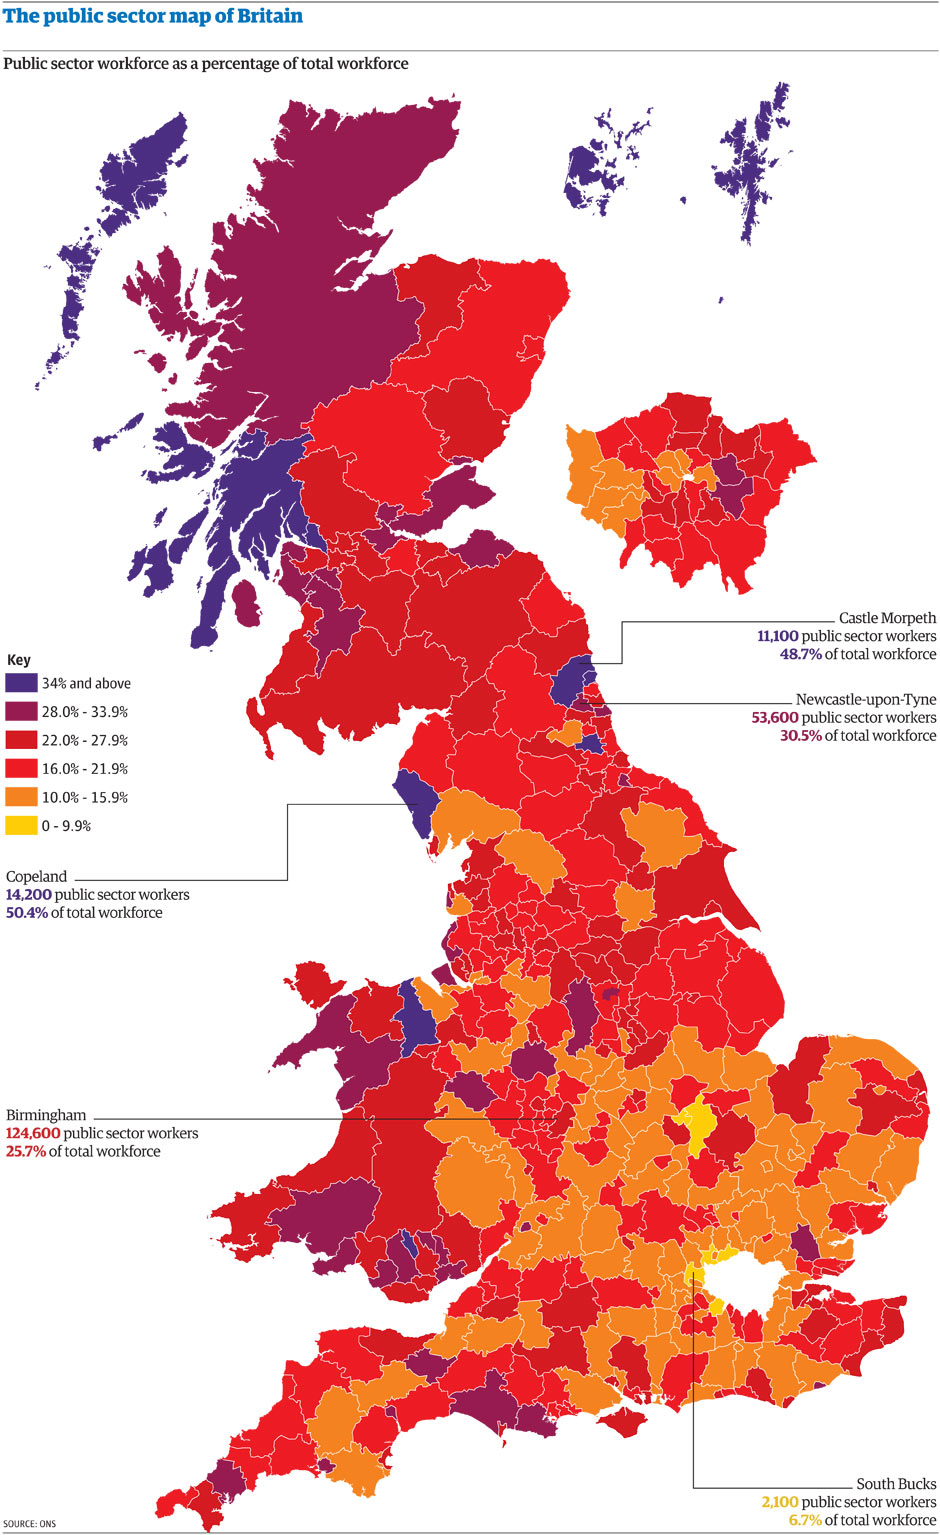 Map Unemployment Uk The public sector employment map of Britain, 2008  News  theguardian.com